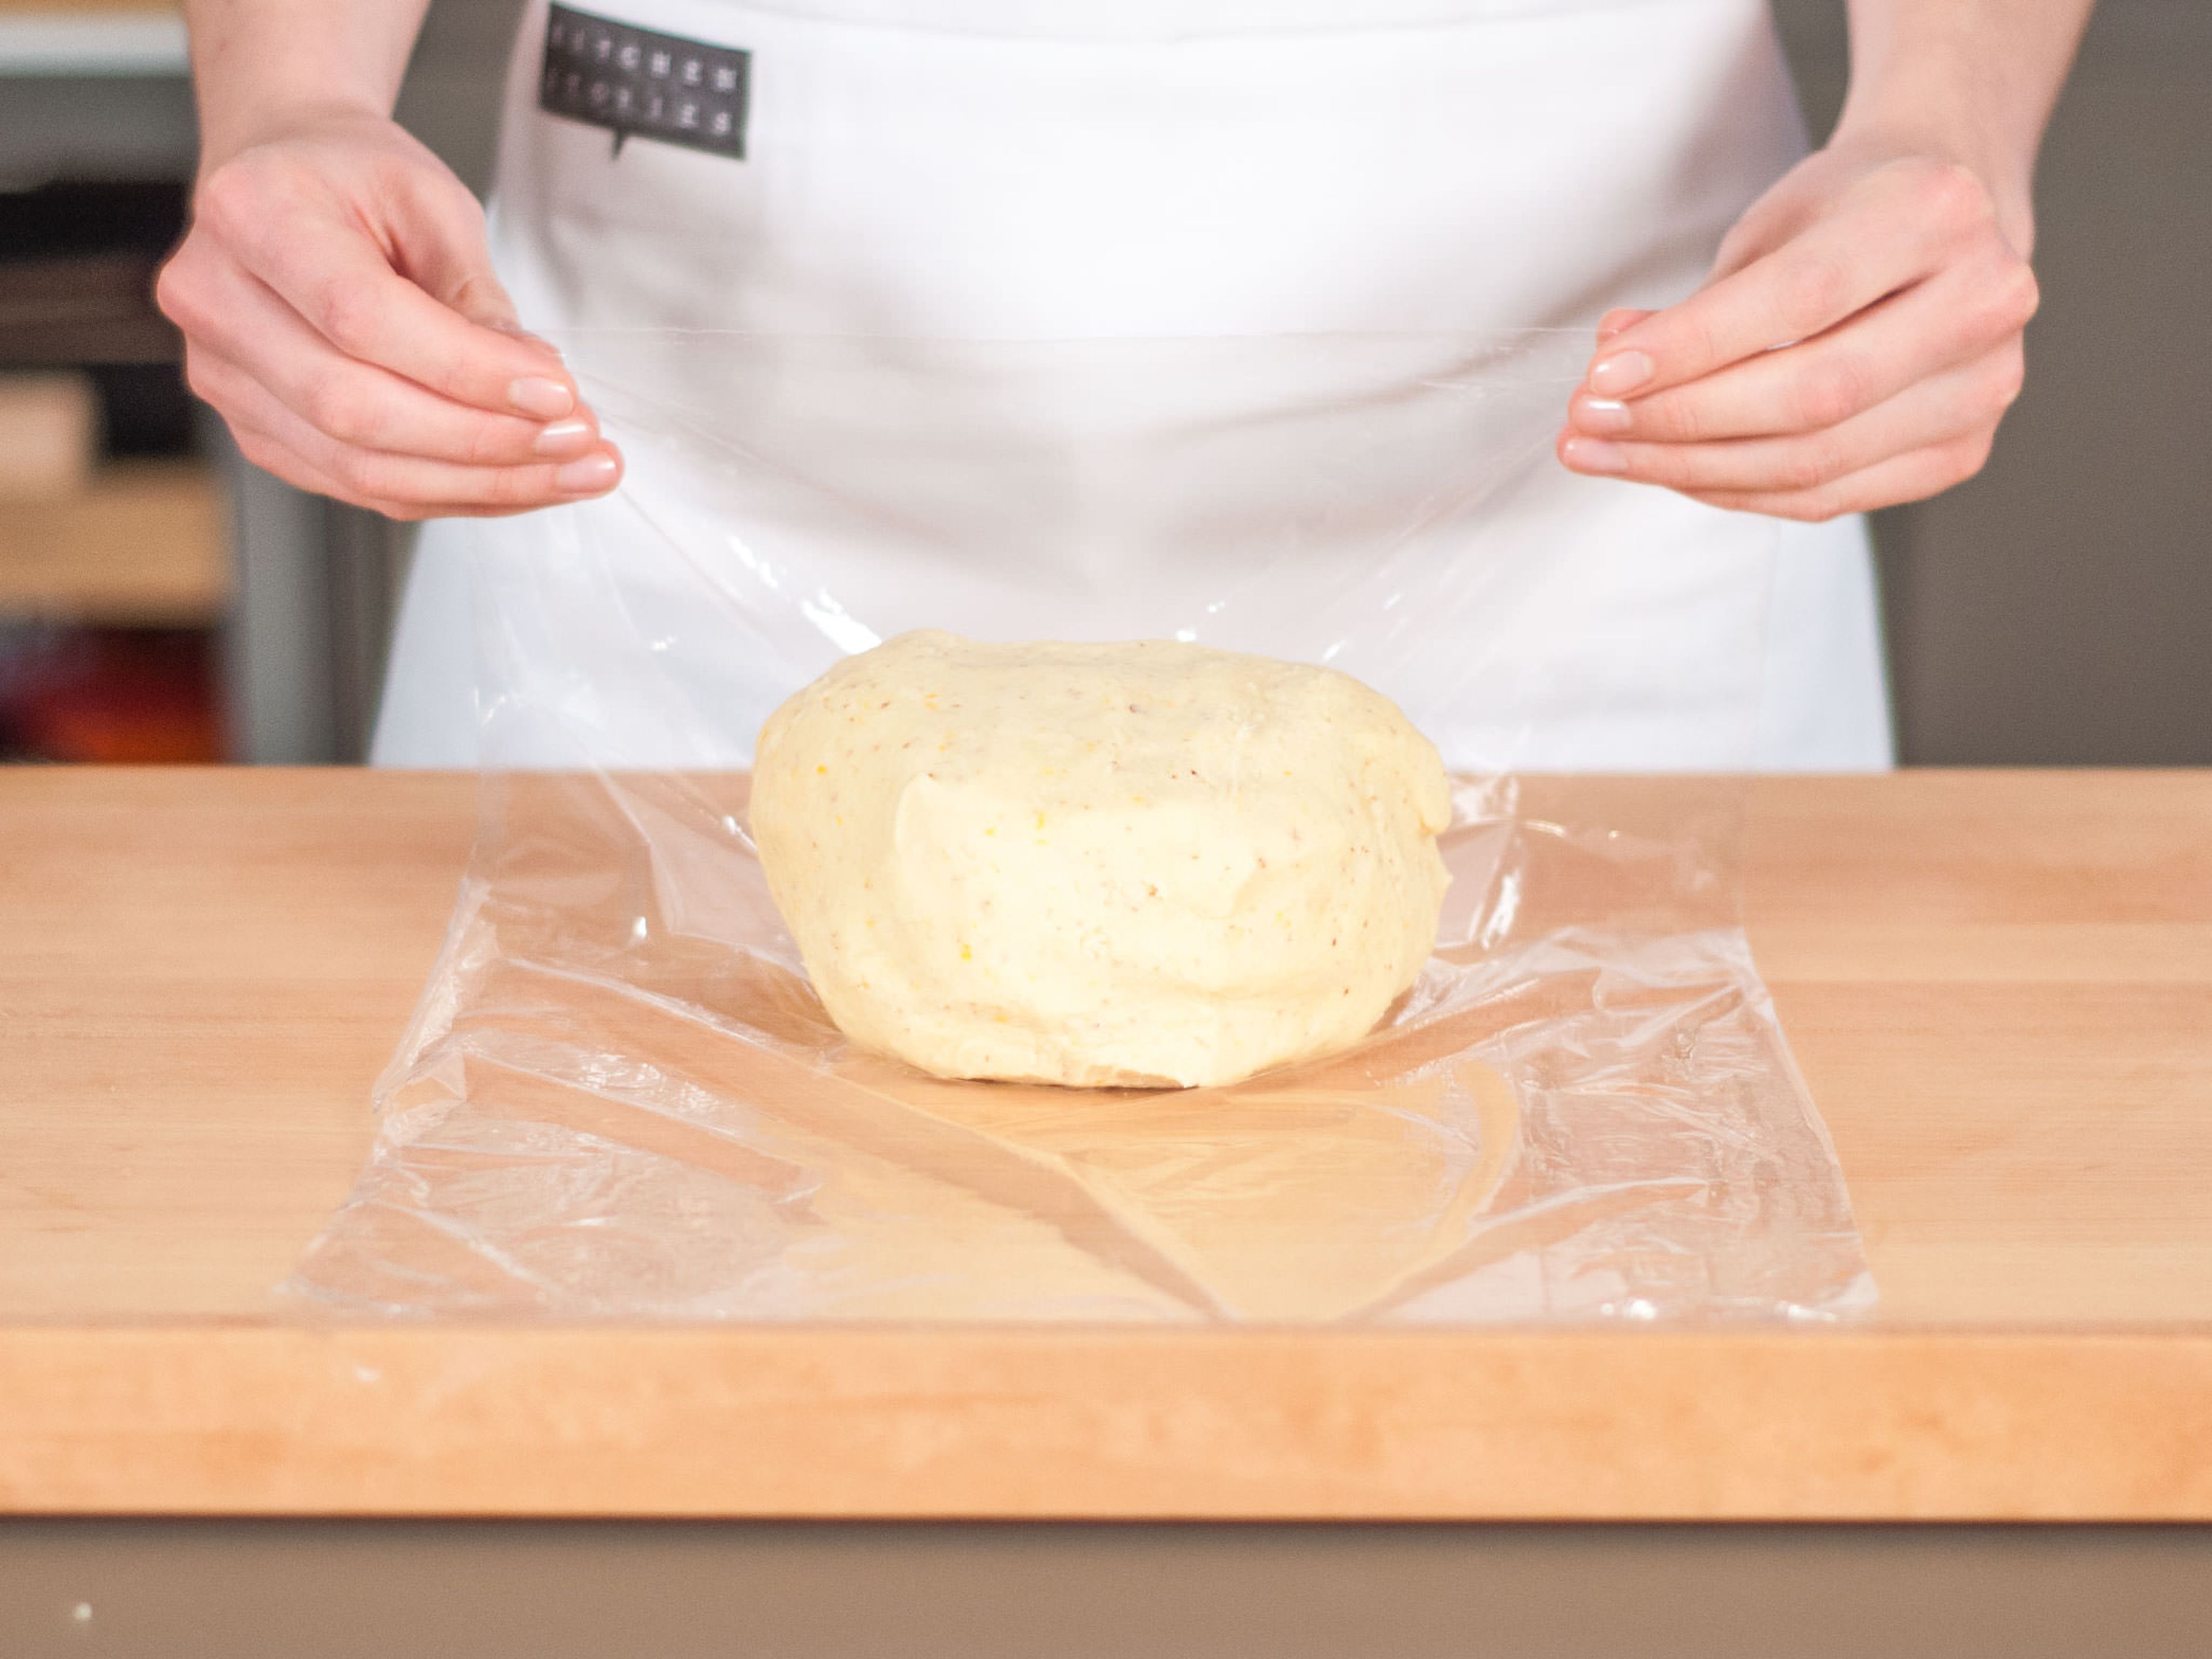 Wrap dough in plastic wrap and transfer to refrigerator. Allow to set for approx. 1 h.